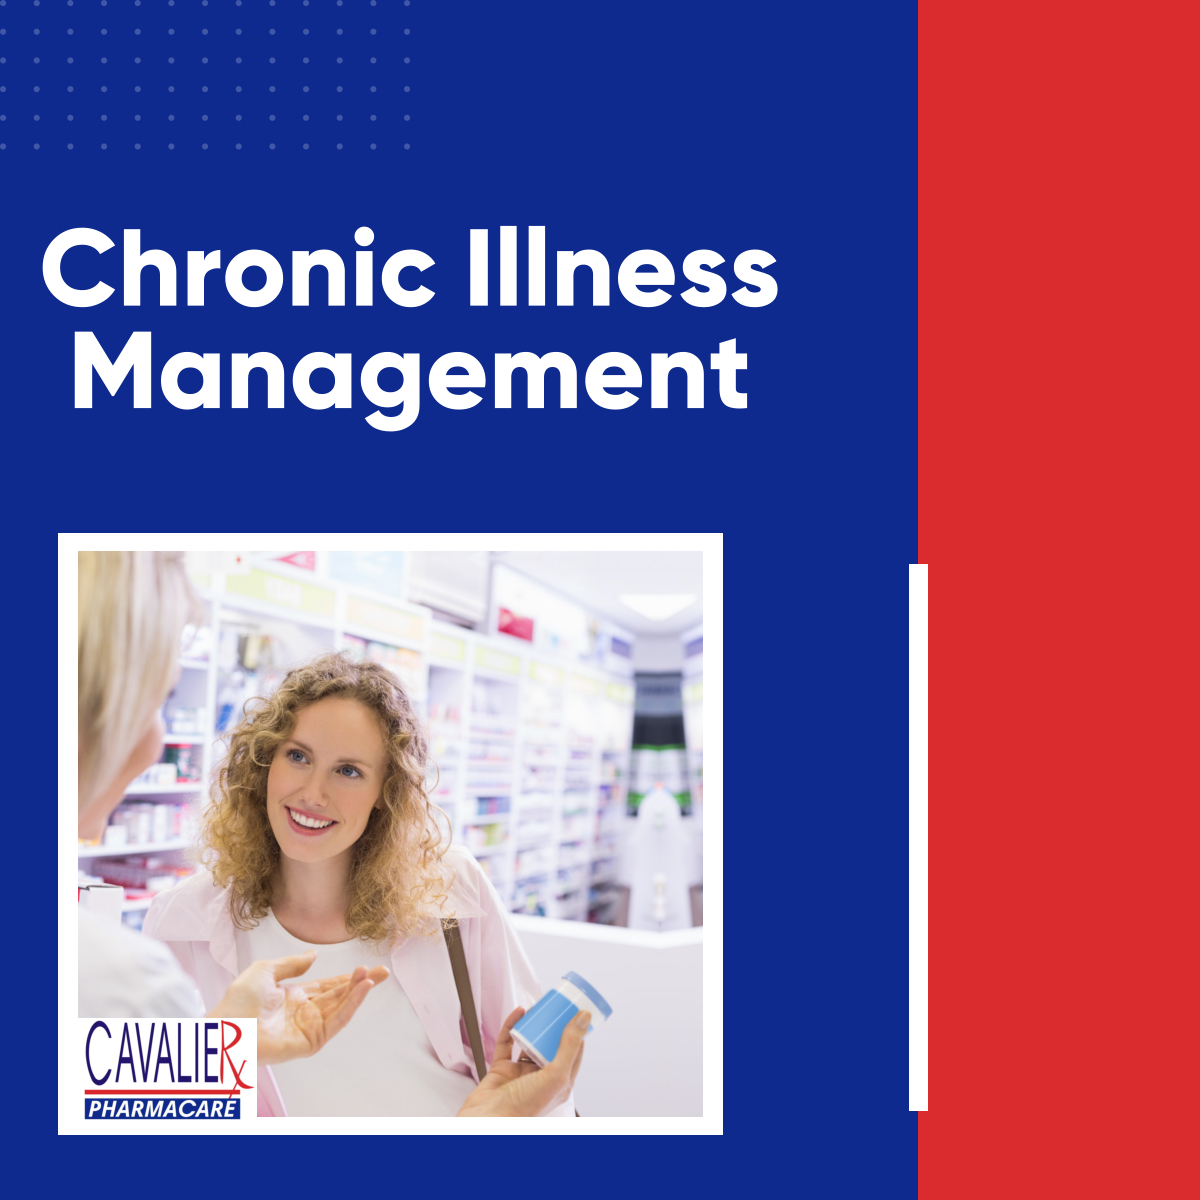 Pharmacies also play an important role in chronic illness management. Aside from being your trusted go-to place for your medications, pharmacies can also be a place where you can get medication education. 

Read more:
facebook.com/CavalierPharma…

#ChronicIllnessManagement